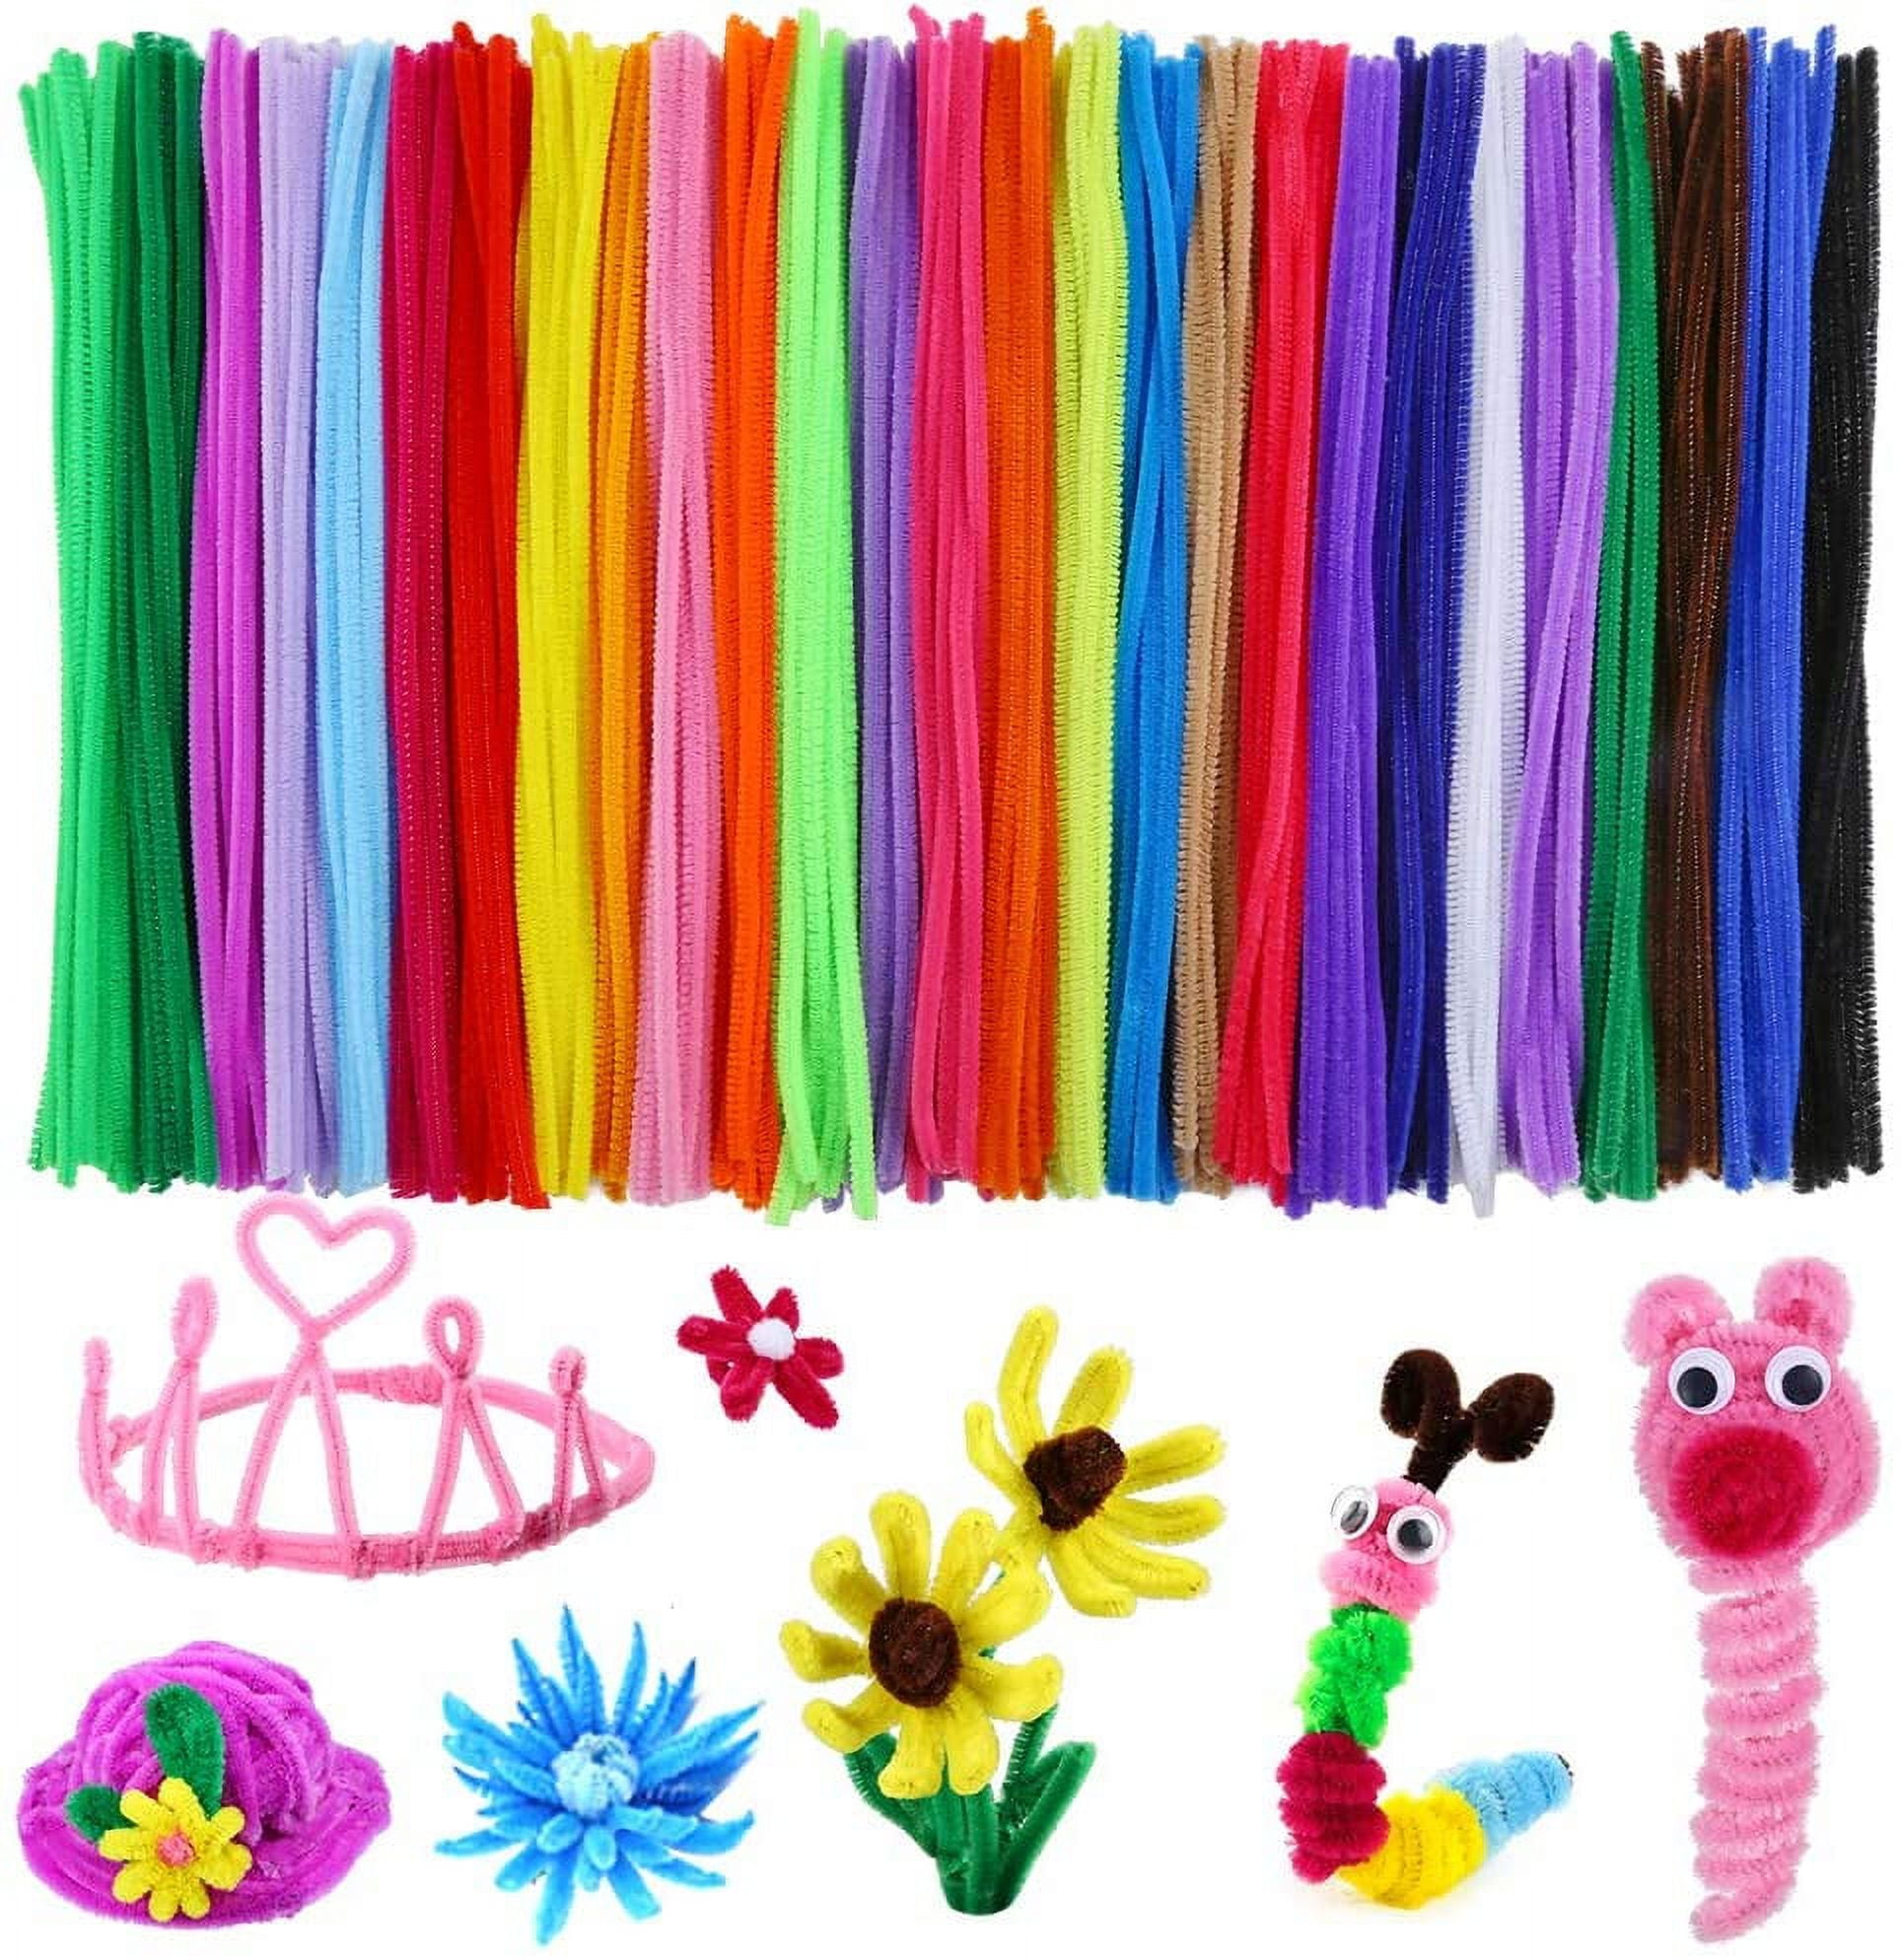 Torsion Bar Pipe Cleaners Crafts Supplies, Flexible Craft Pipe Cleaner  Creative Kids Diy Decoration, 10 Colors Soft Bristle